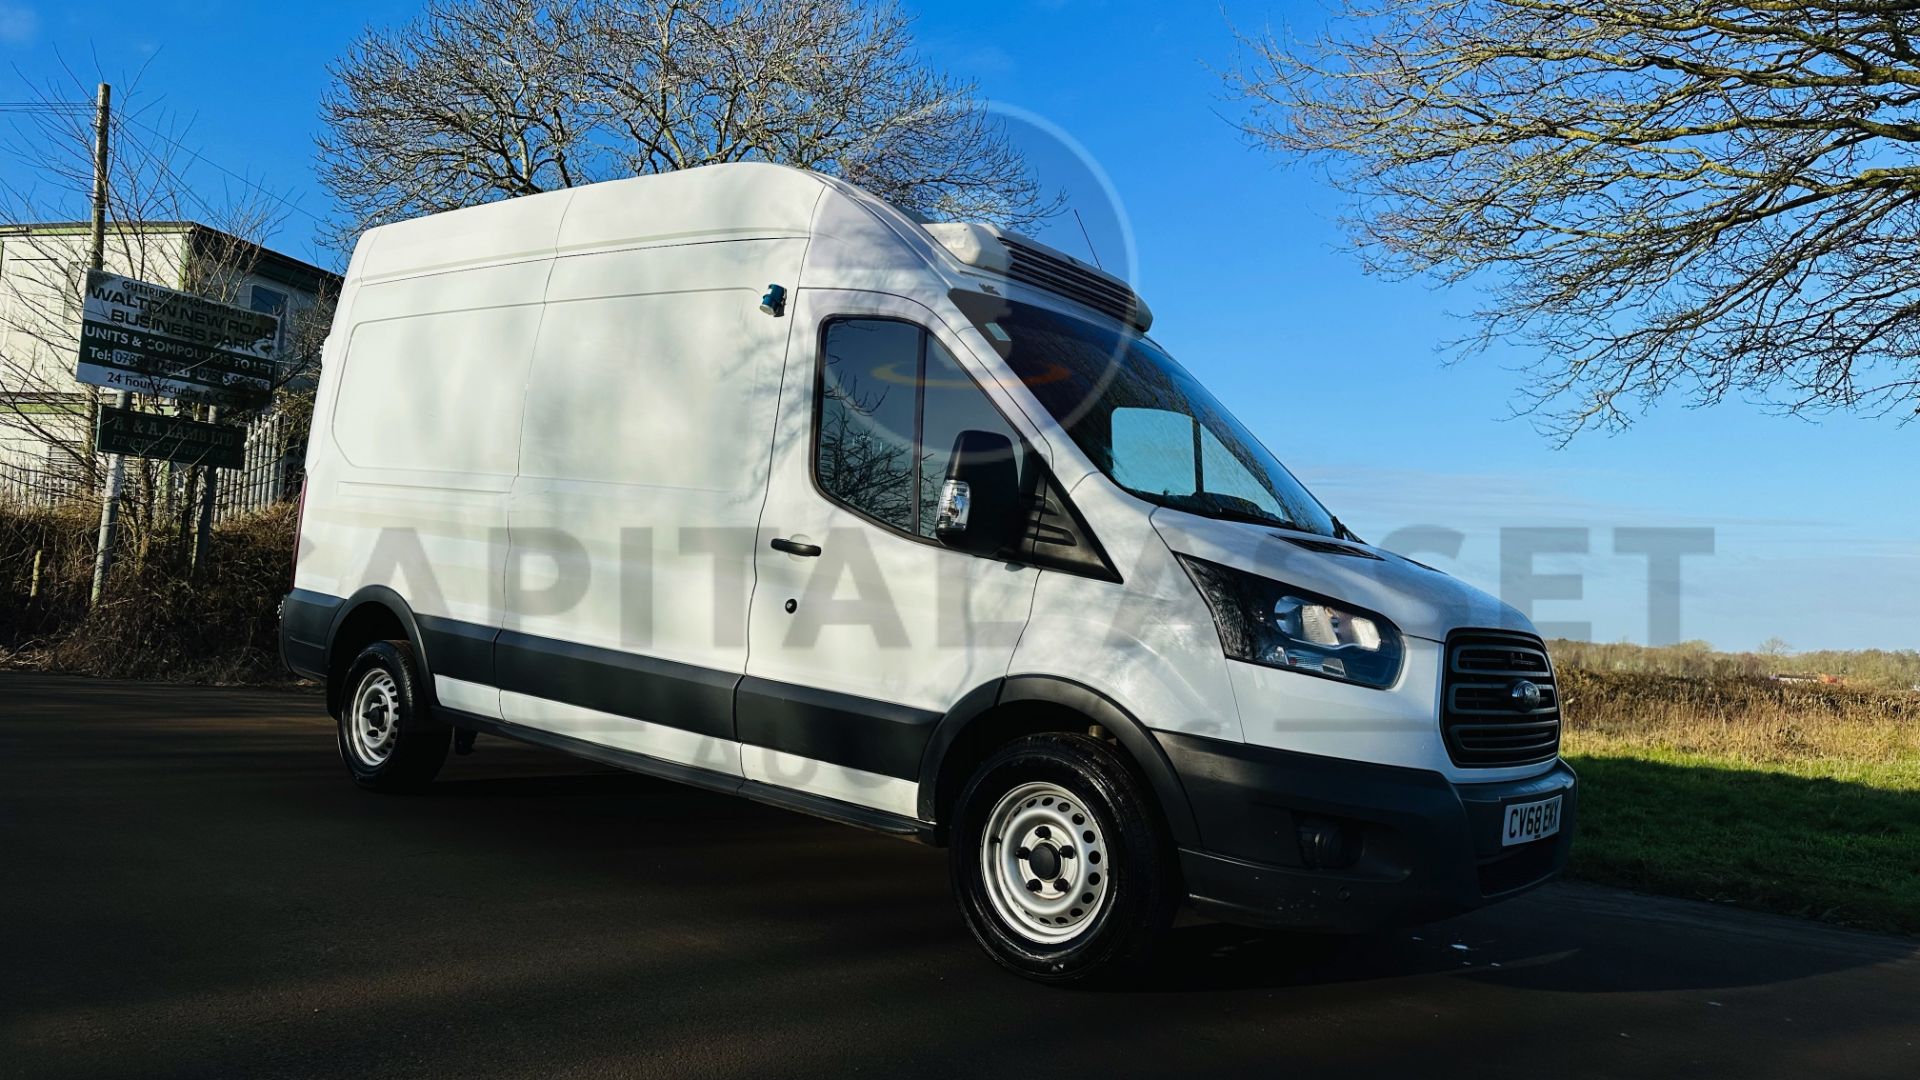 (On Sale) FORD TRANSIT 130 T350 *LWB -REFRIGERATED VAN* (2019 - EURO 6) 2.0 TDCI 'ECOBLUE' - 6 SPEED - Image 3 of 43